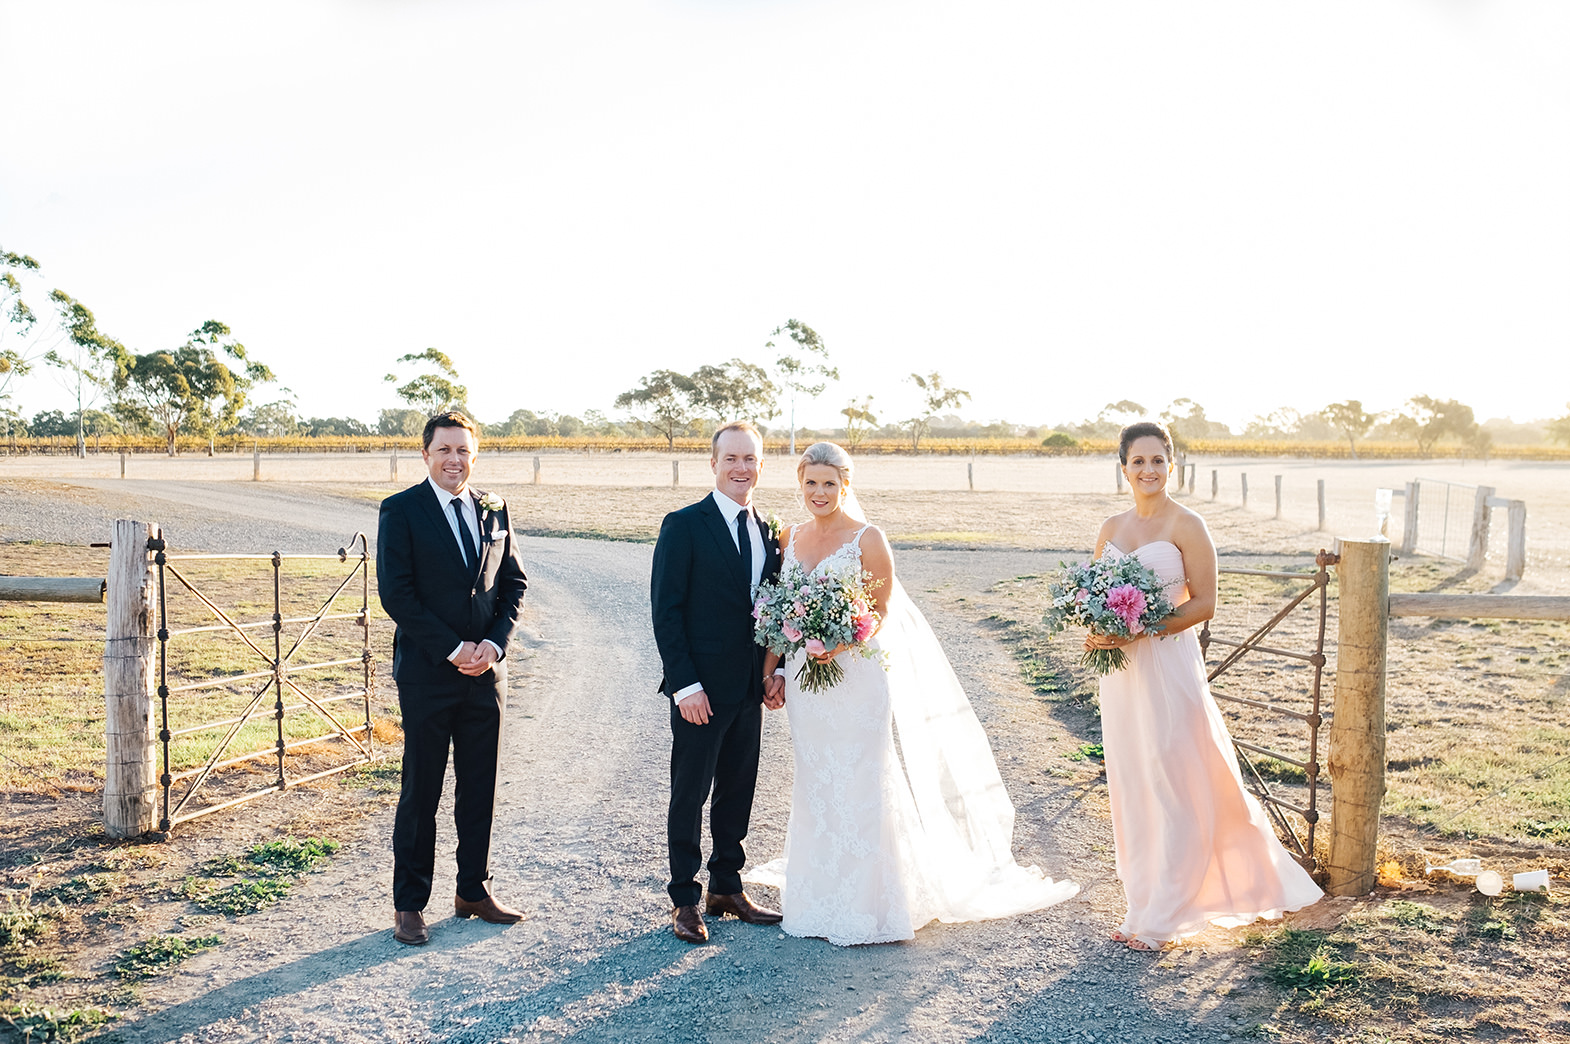 042 Wedding Photographer Adelaide - Year in Review 2016.jpg